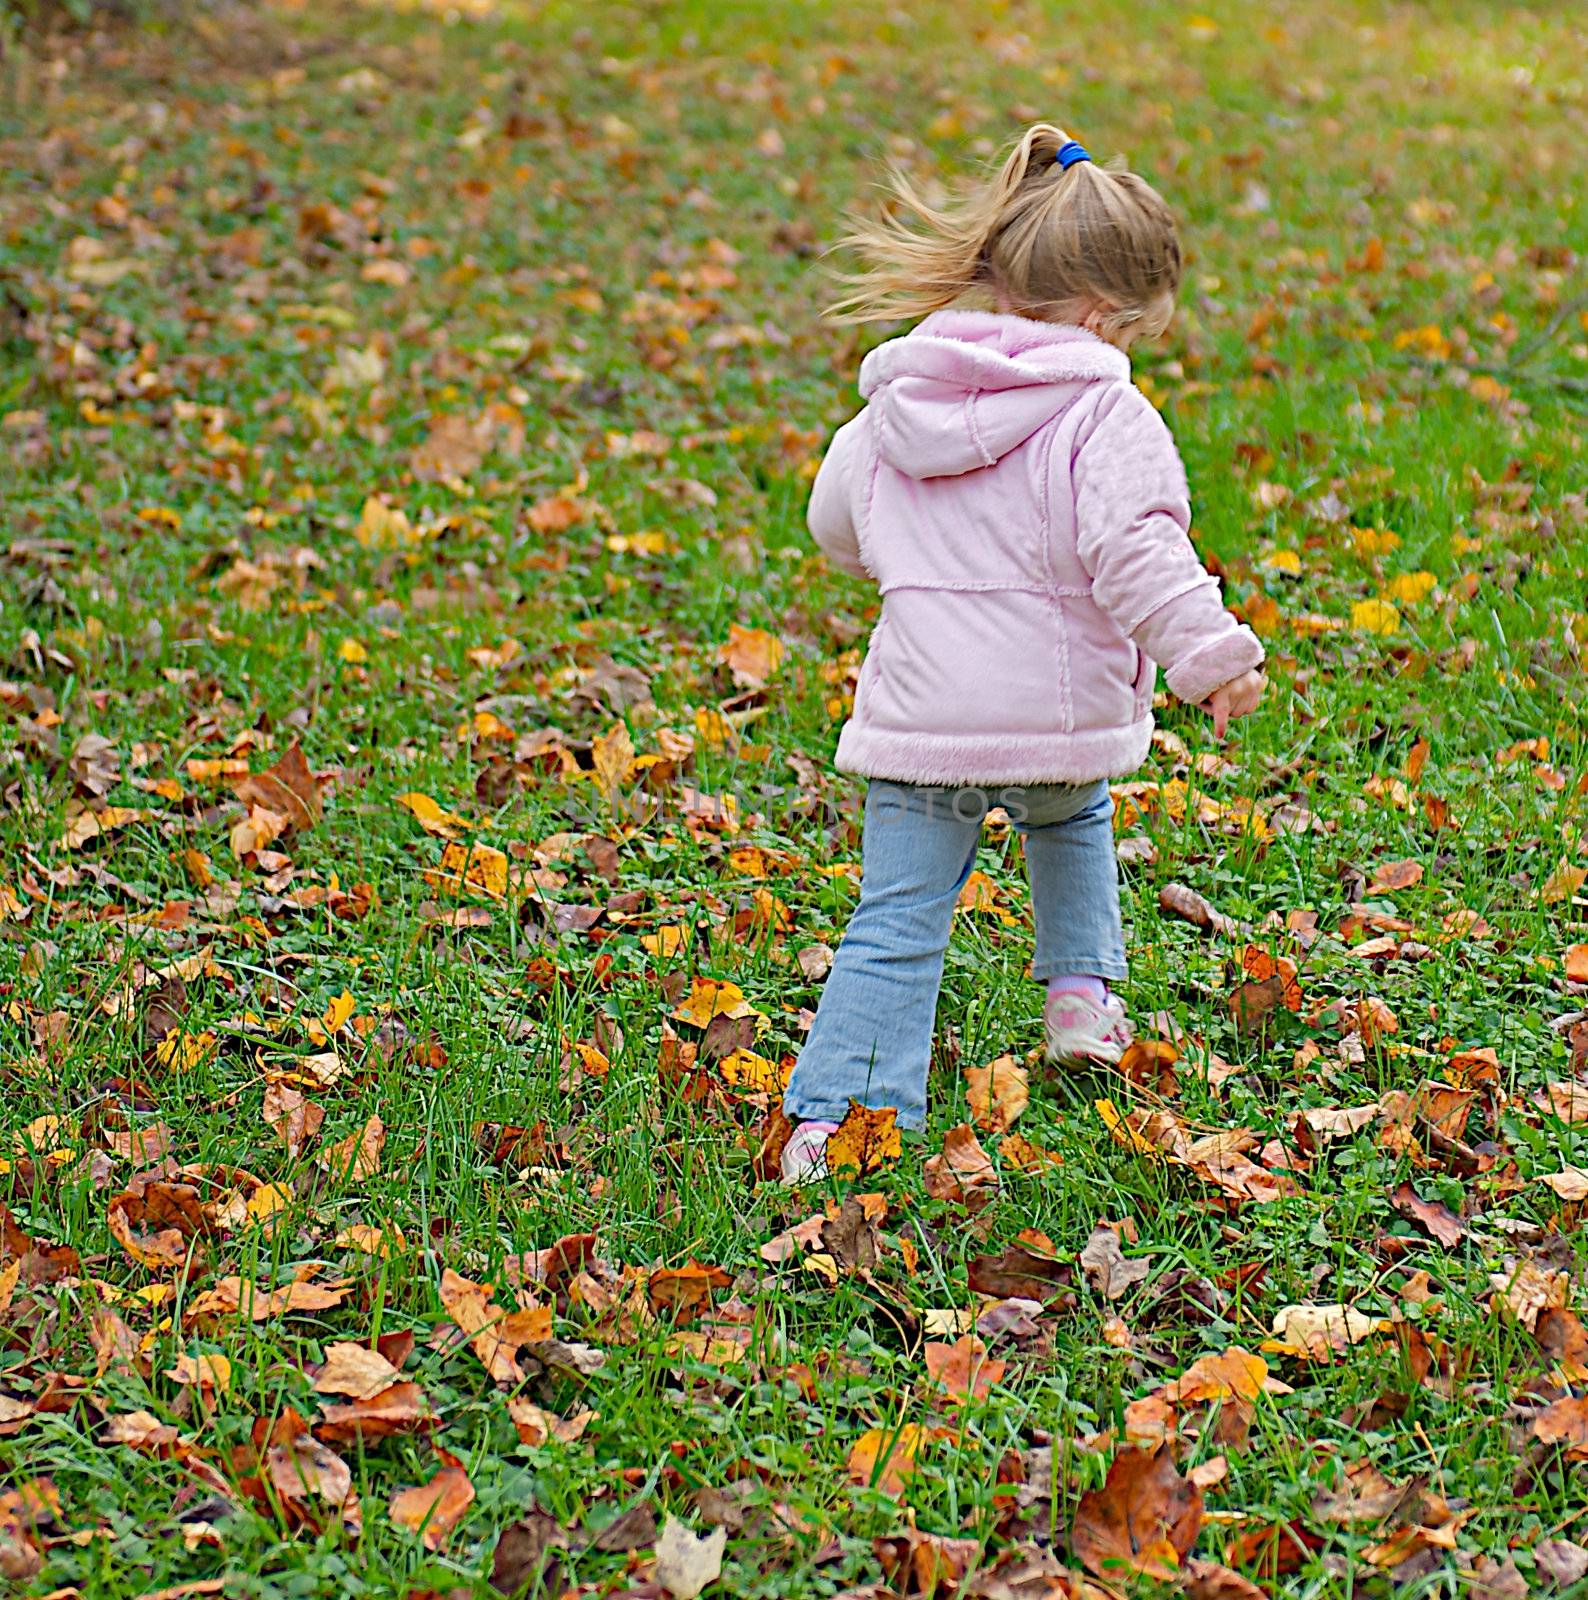 Cute young girl skipping in the autumn leaves of a playground.